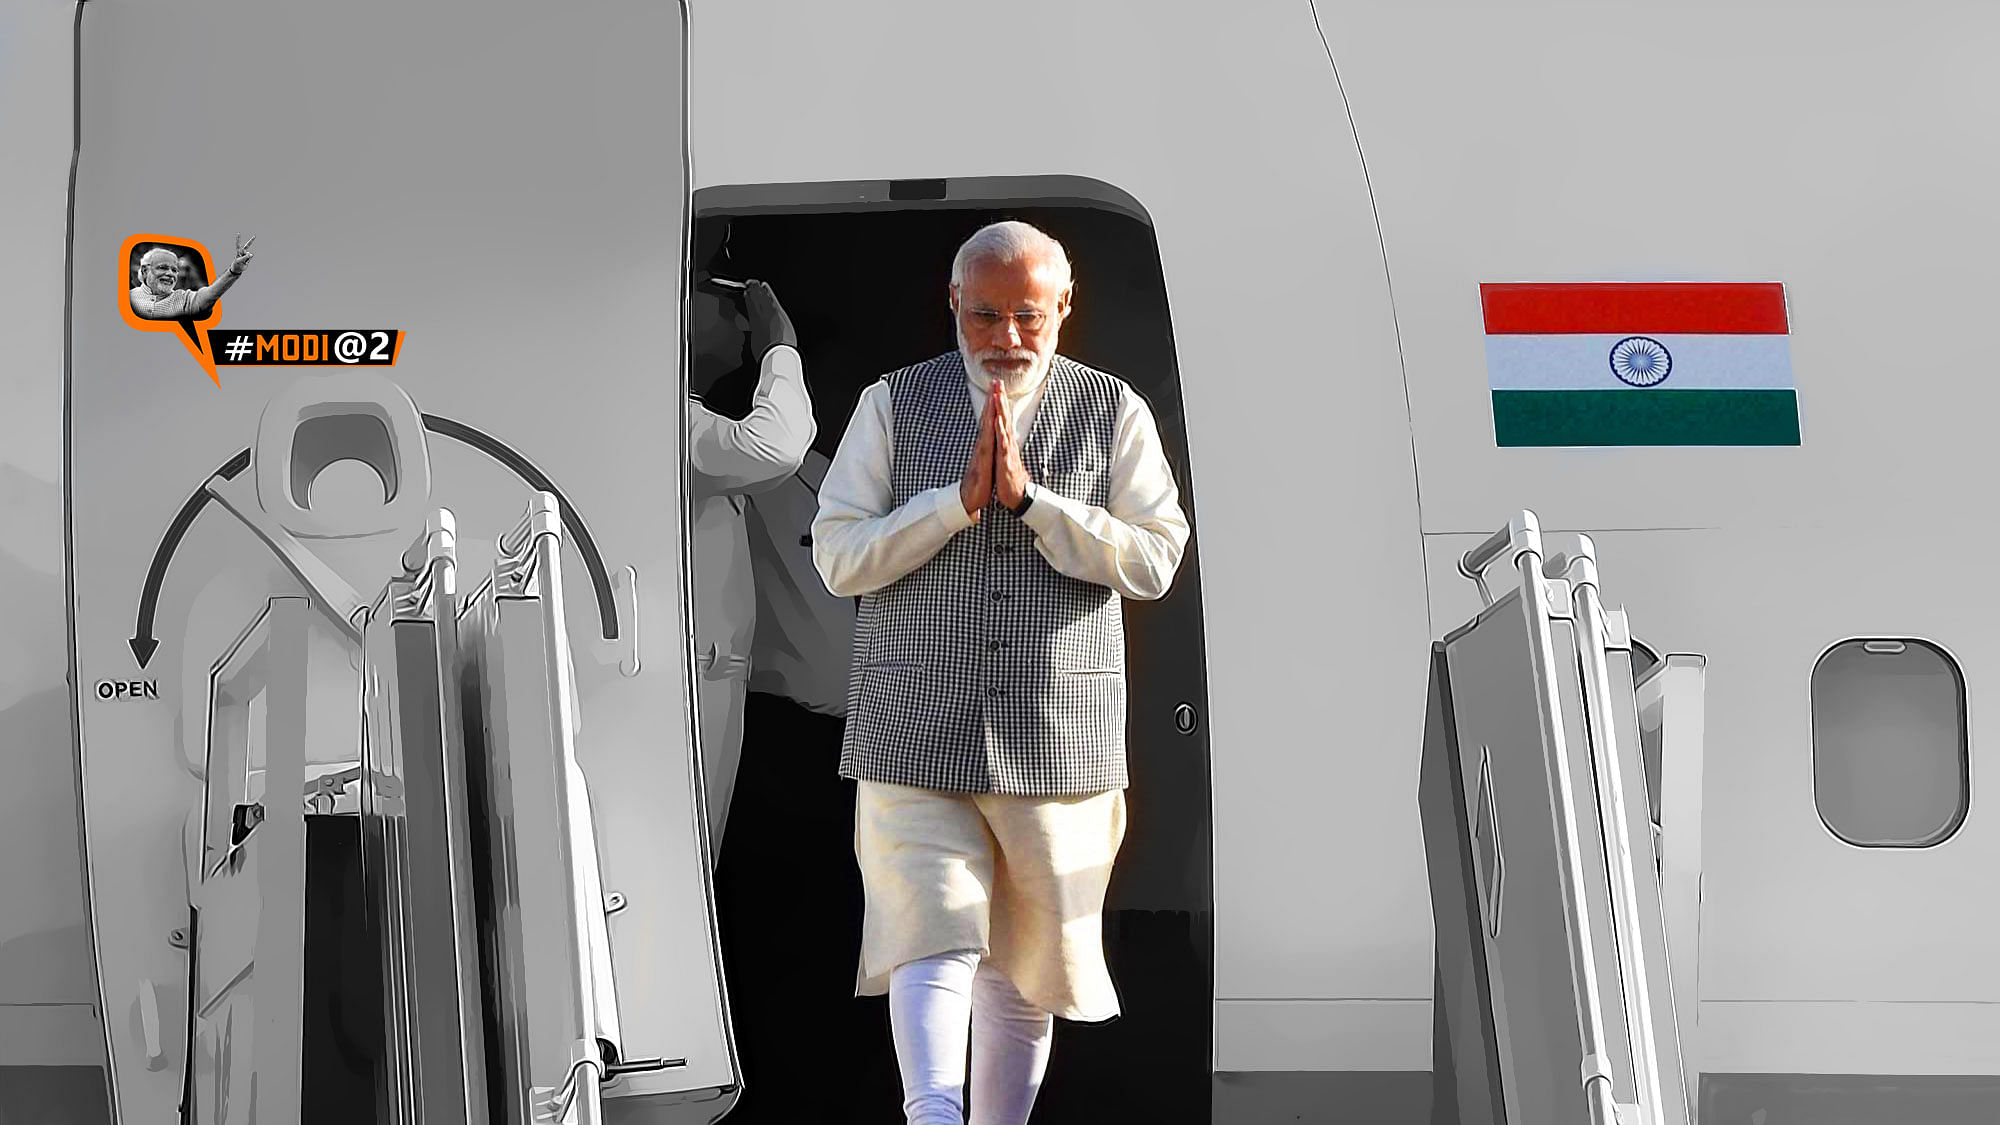 Prime Minister Narendra Modi arrives at Mehrabad airport in Tehran on his two-day visit to Iran, May 22, 2016. (Photo: PTI/Altered by <b>The Quint</b>)